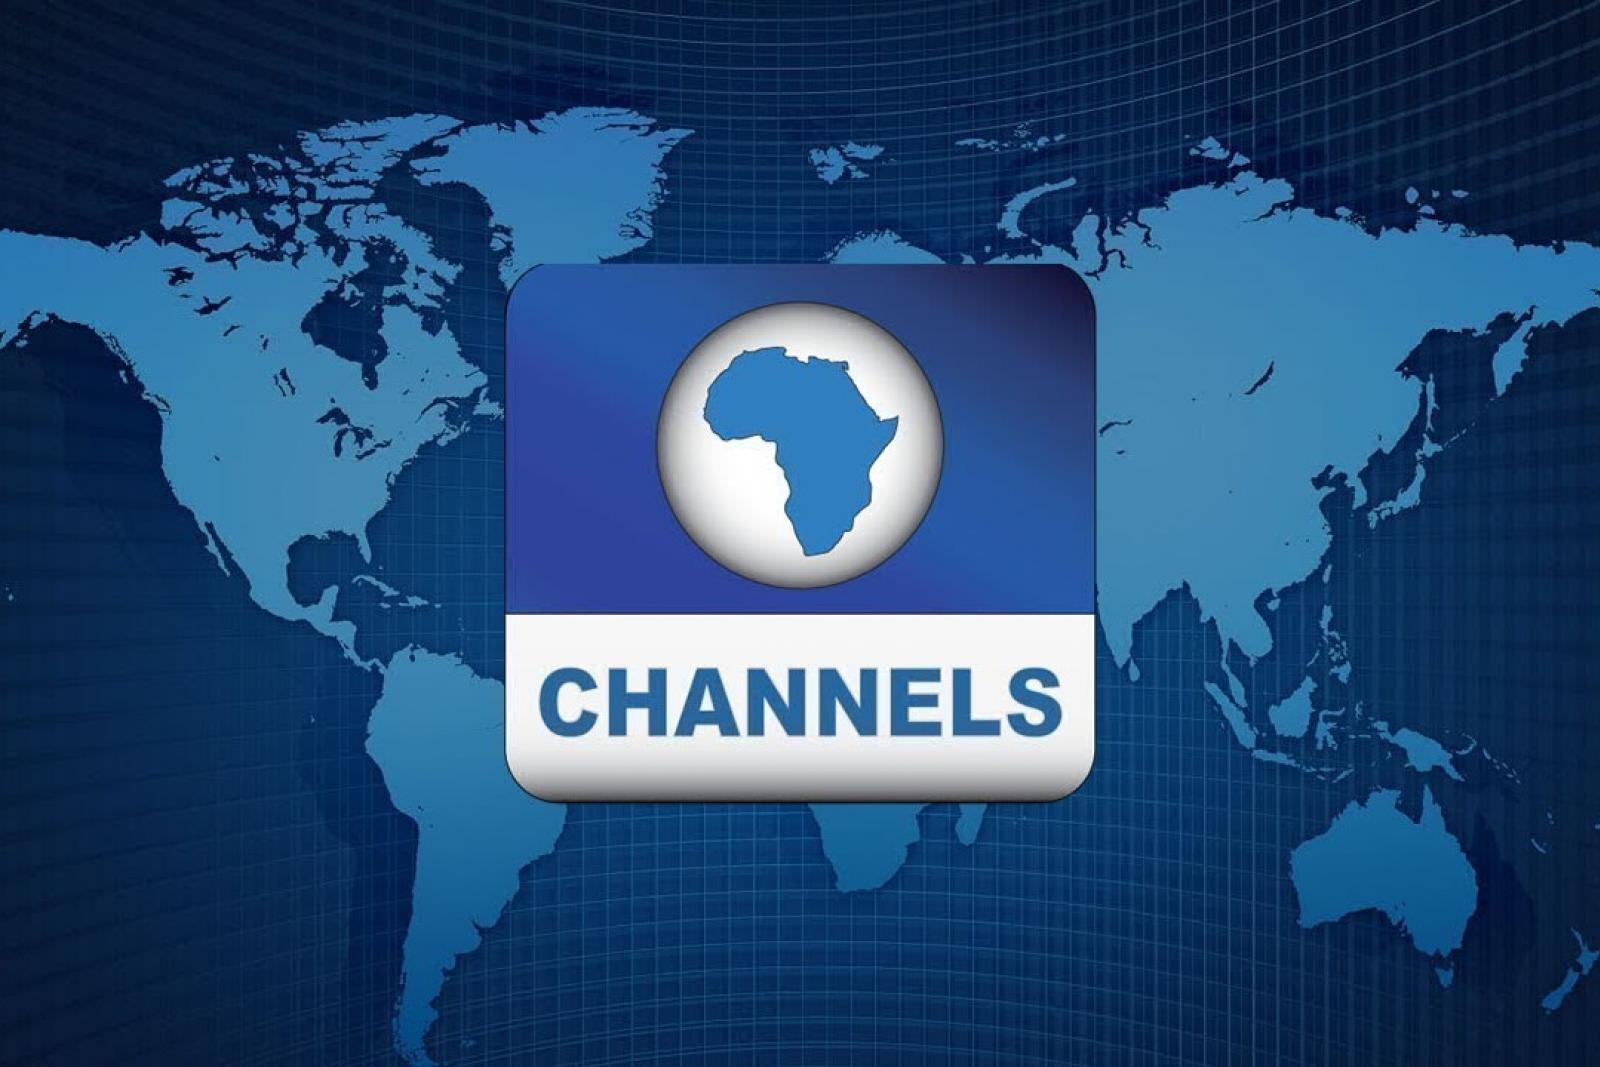 Fighting Corruption in Nigeria: Dr Kenneth Amaeshi – an Interview on Channels TV